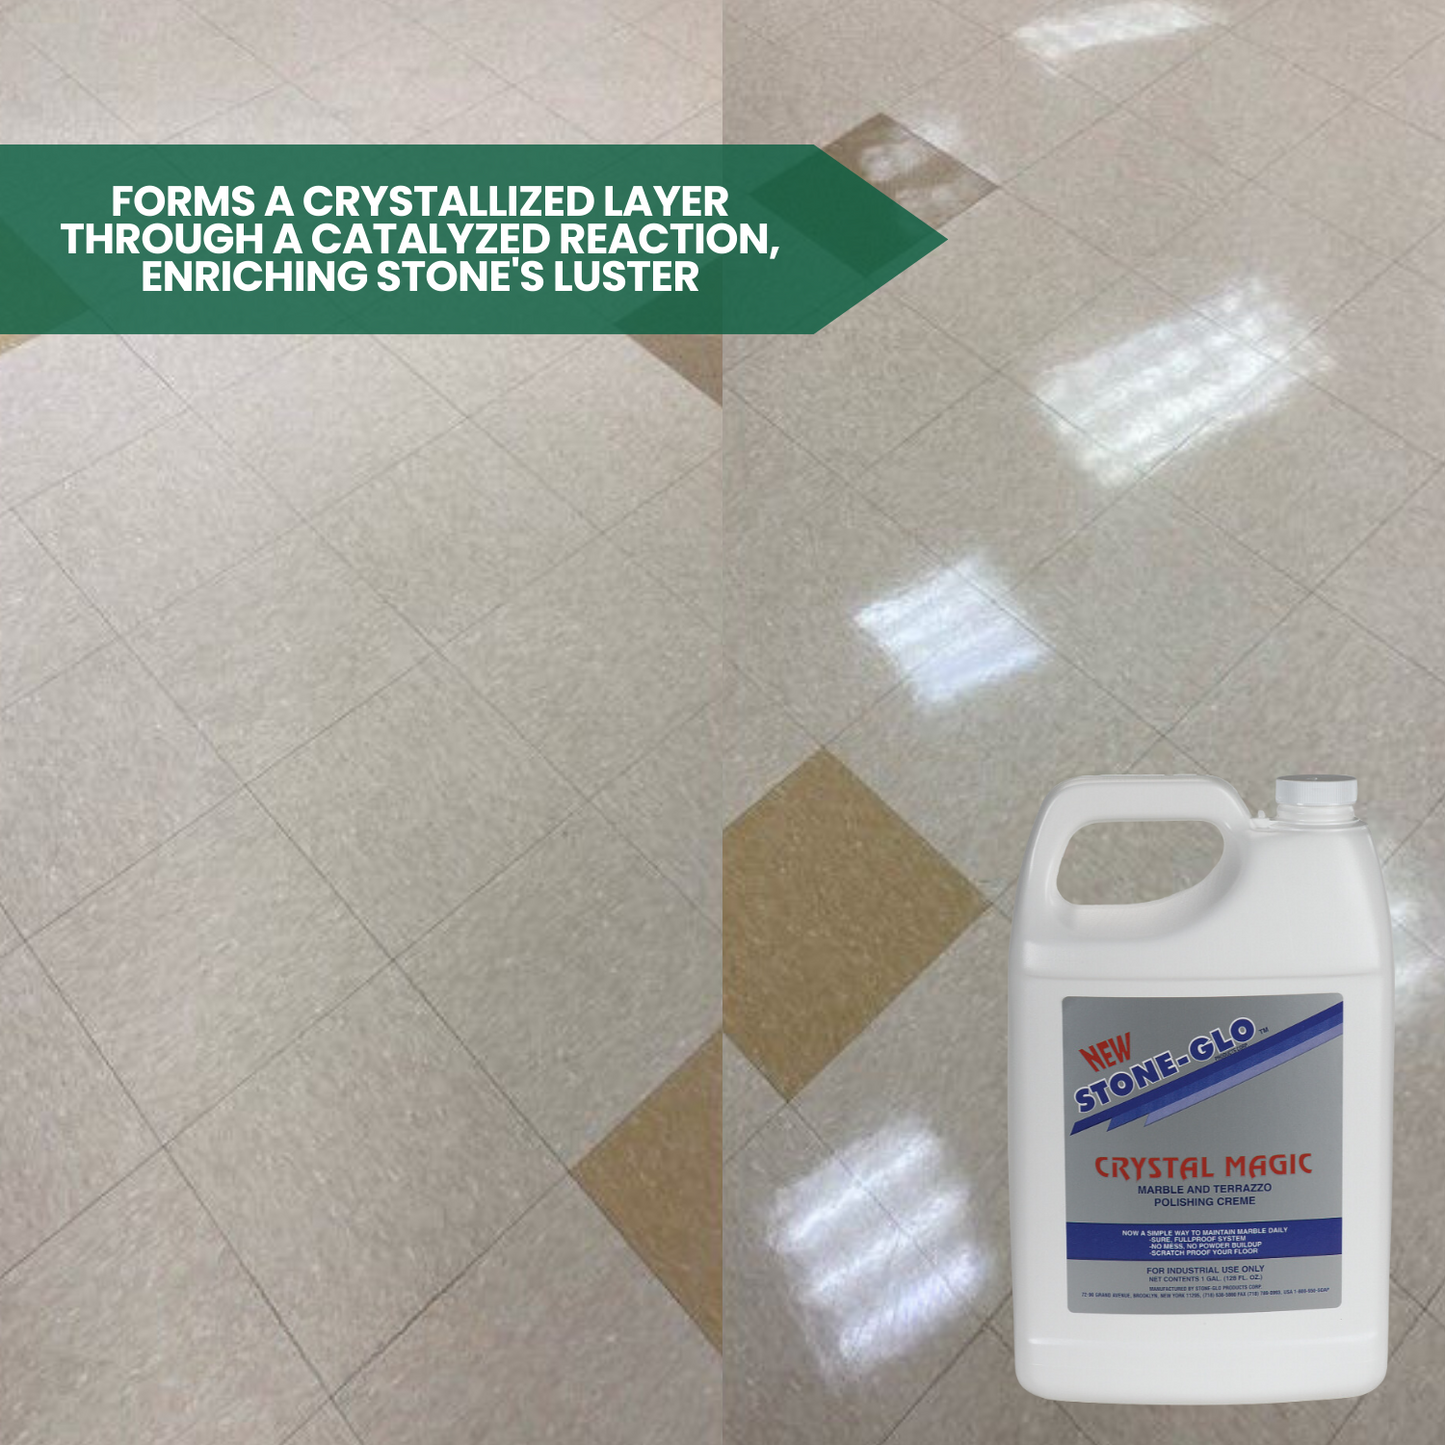 STONE-GLO Crystal Magic - Floor Polish, for Ultimate Shine, Durability & Protection - Polishing Tile Cleaner, Scratch Removal (4x1 Gallon Case)